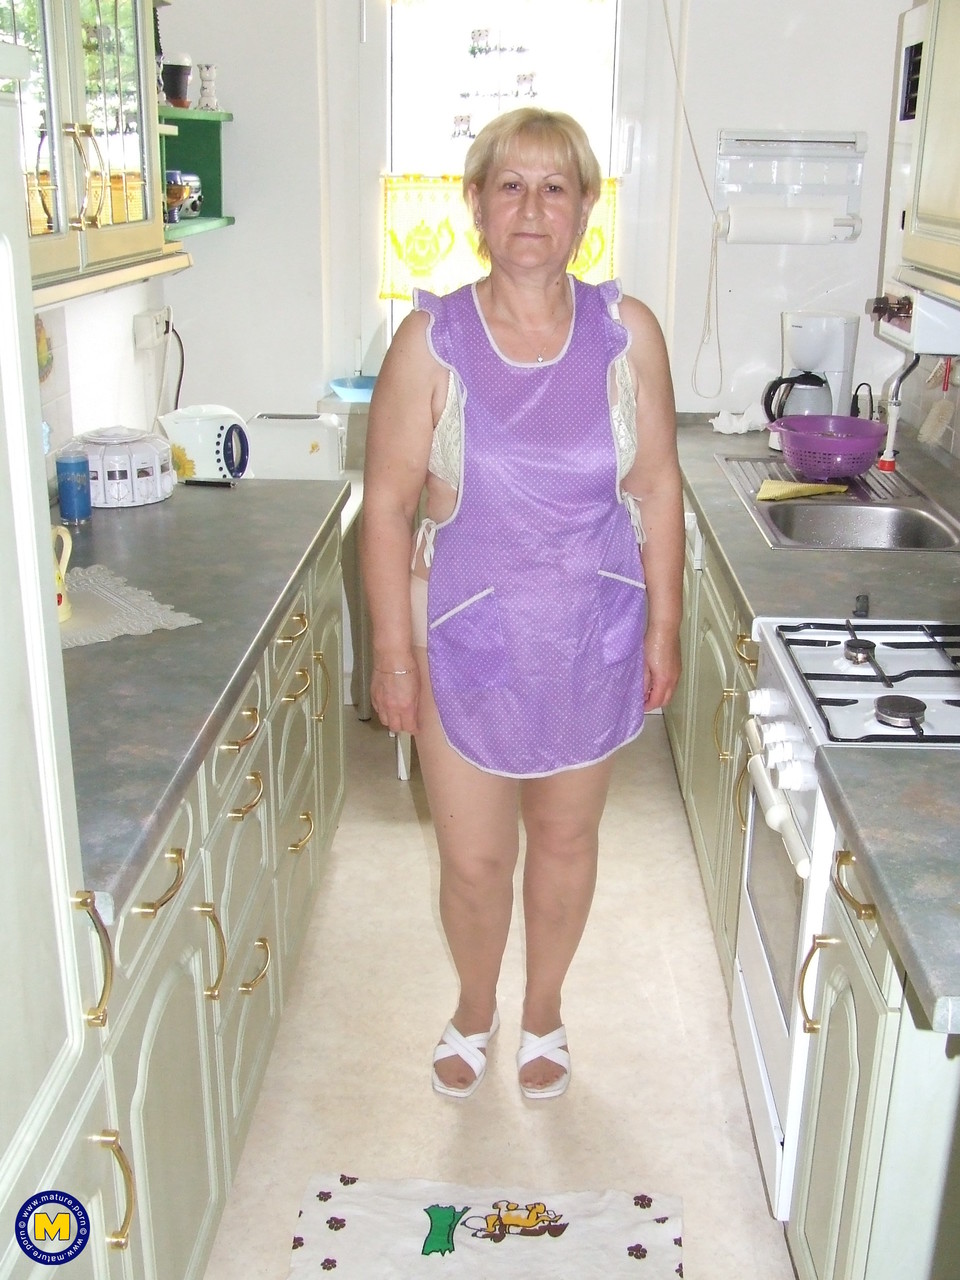 Short haired German cleaning lady Dagmar shows her mature cunt in the kitchen foto porno #425226956